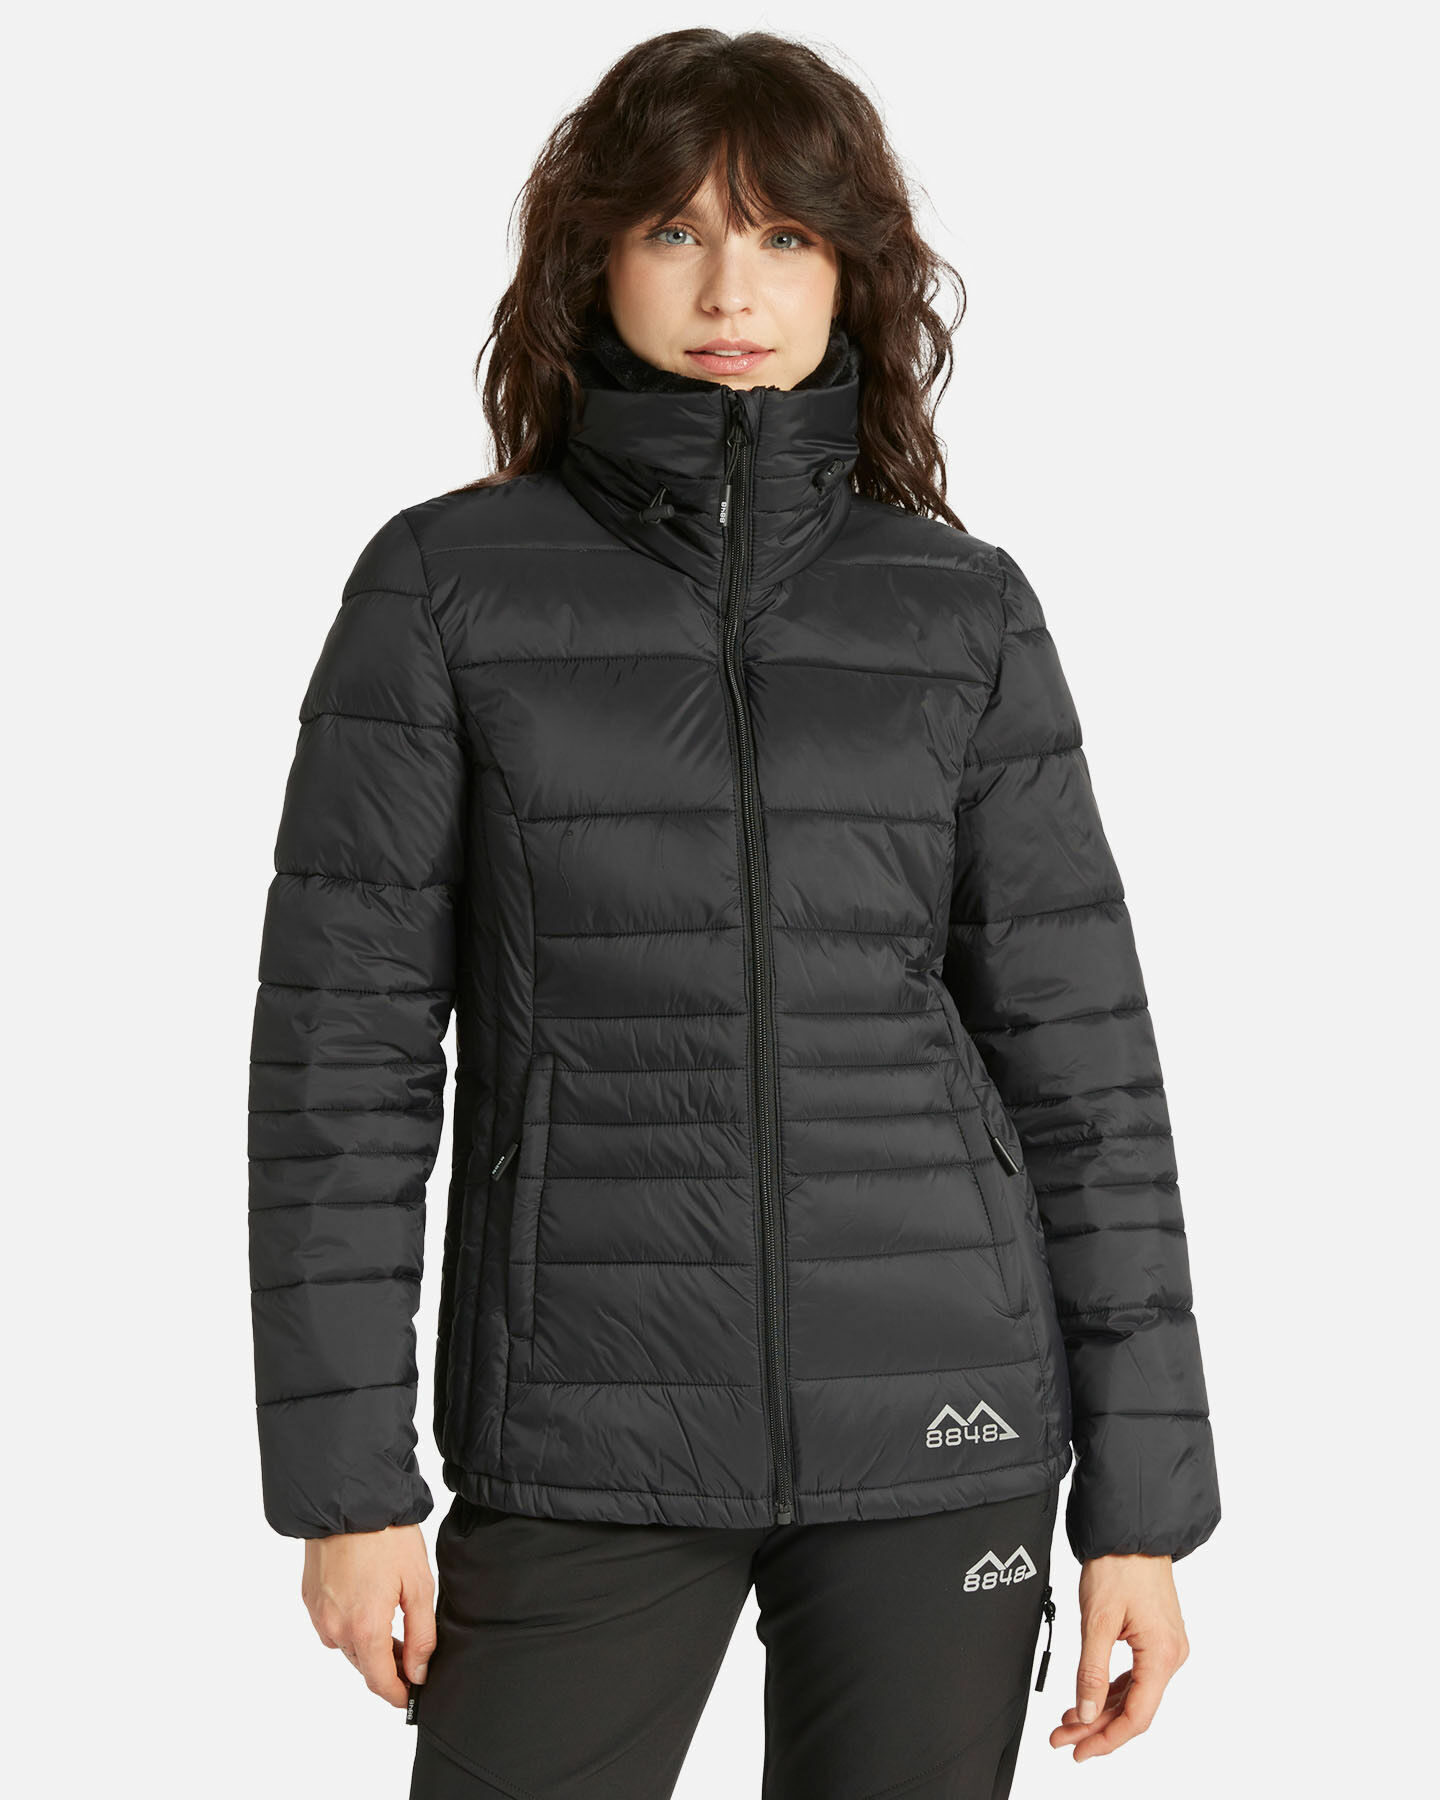 MOUNTAIN ESSENTIAL GIACCA DONNA NERA